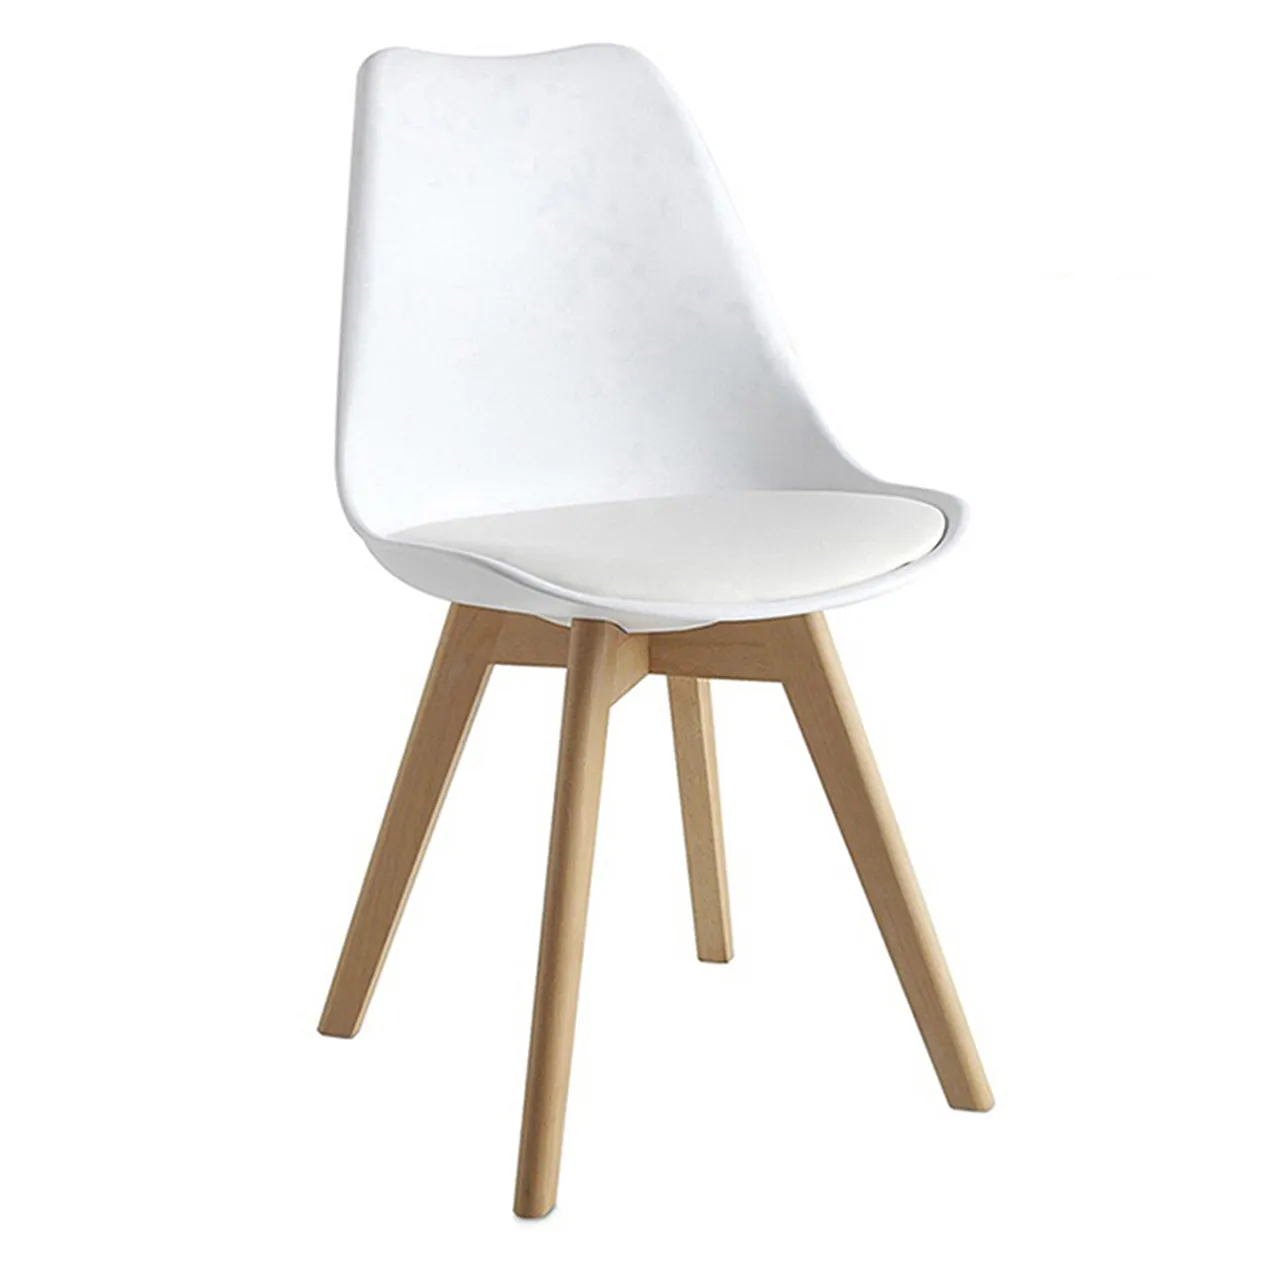 Tulip Dining Chair Colored Plastic with Beech Wood Cheap High Quality Modern Home Furniture Dining Tables Nordic Chair PP Seat